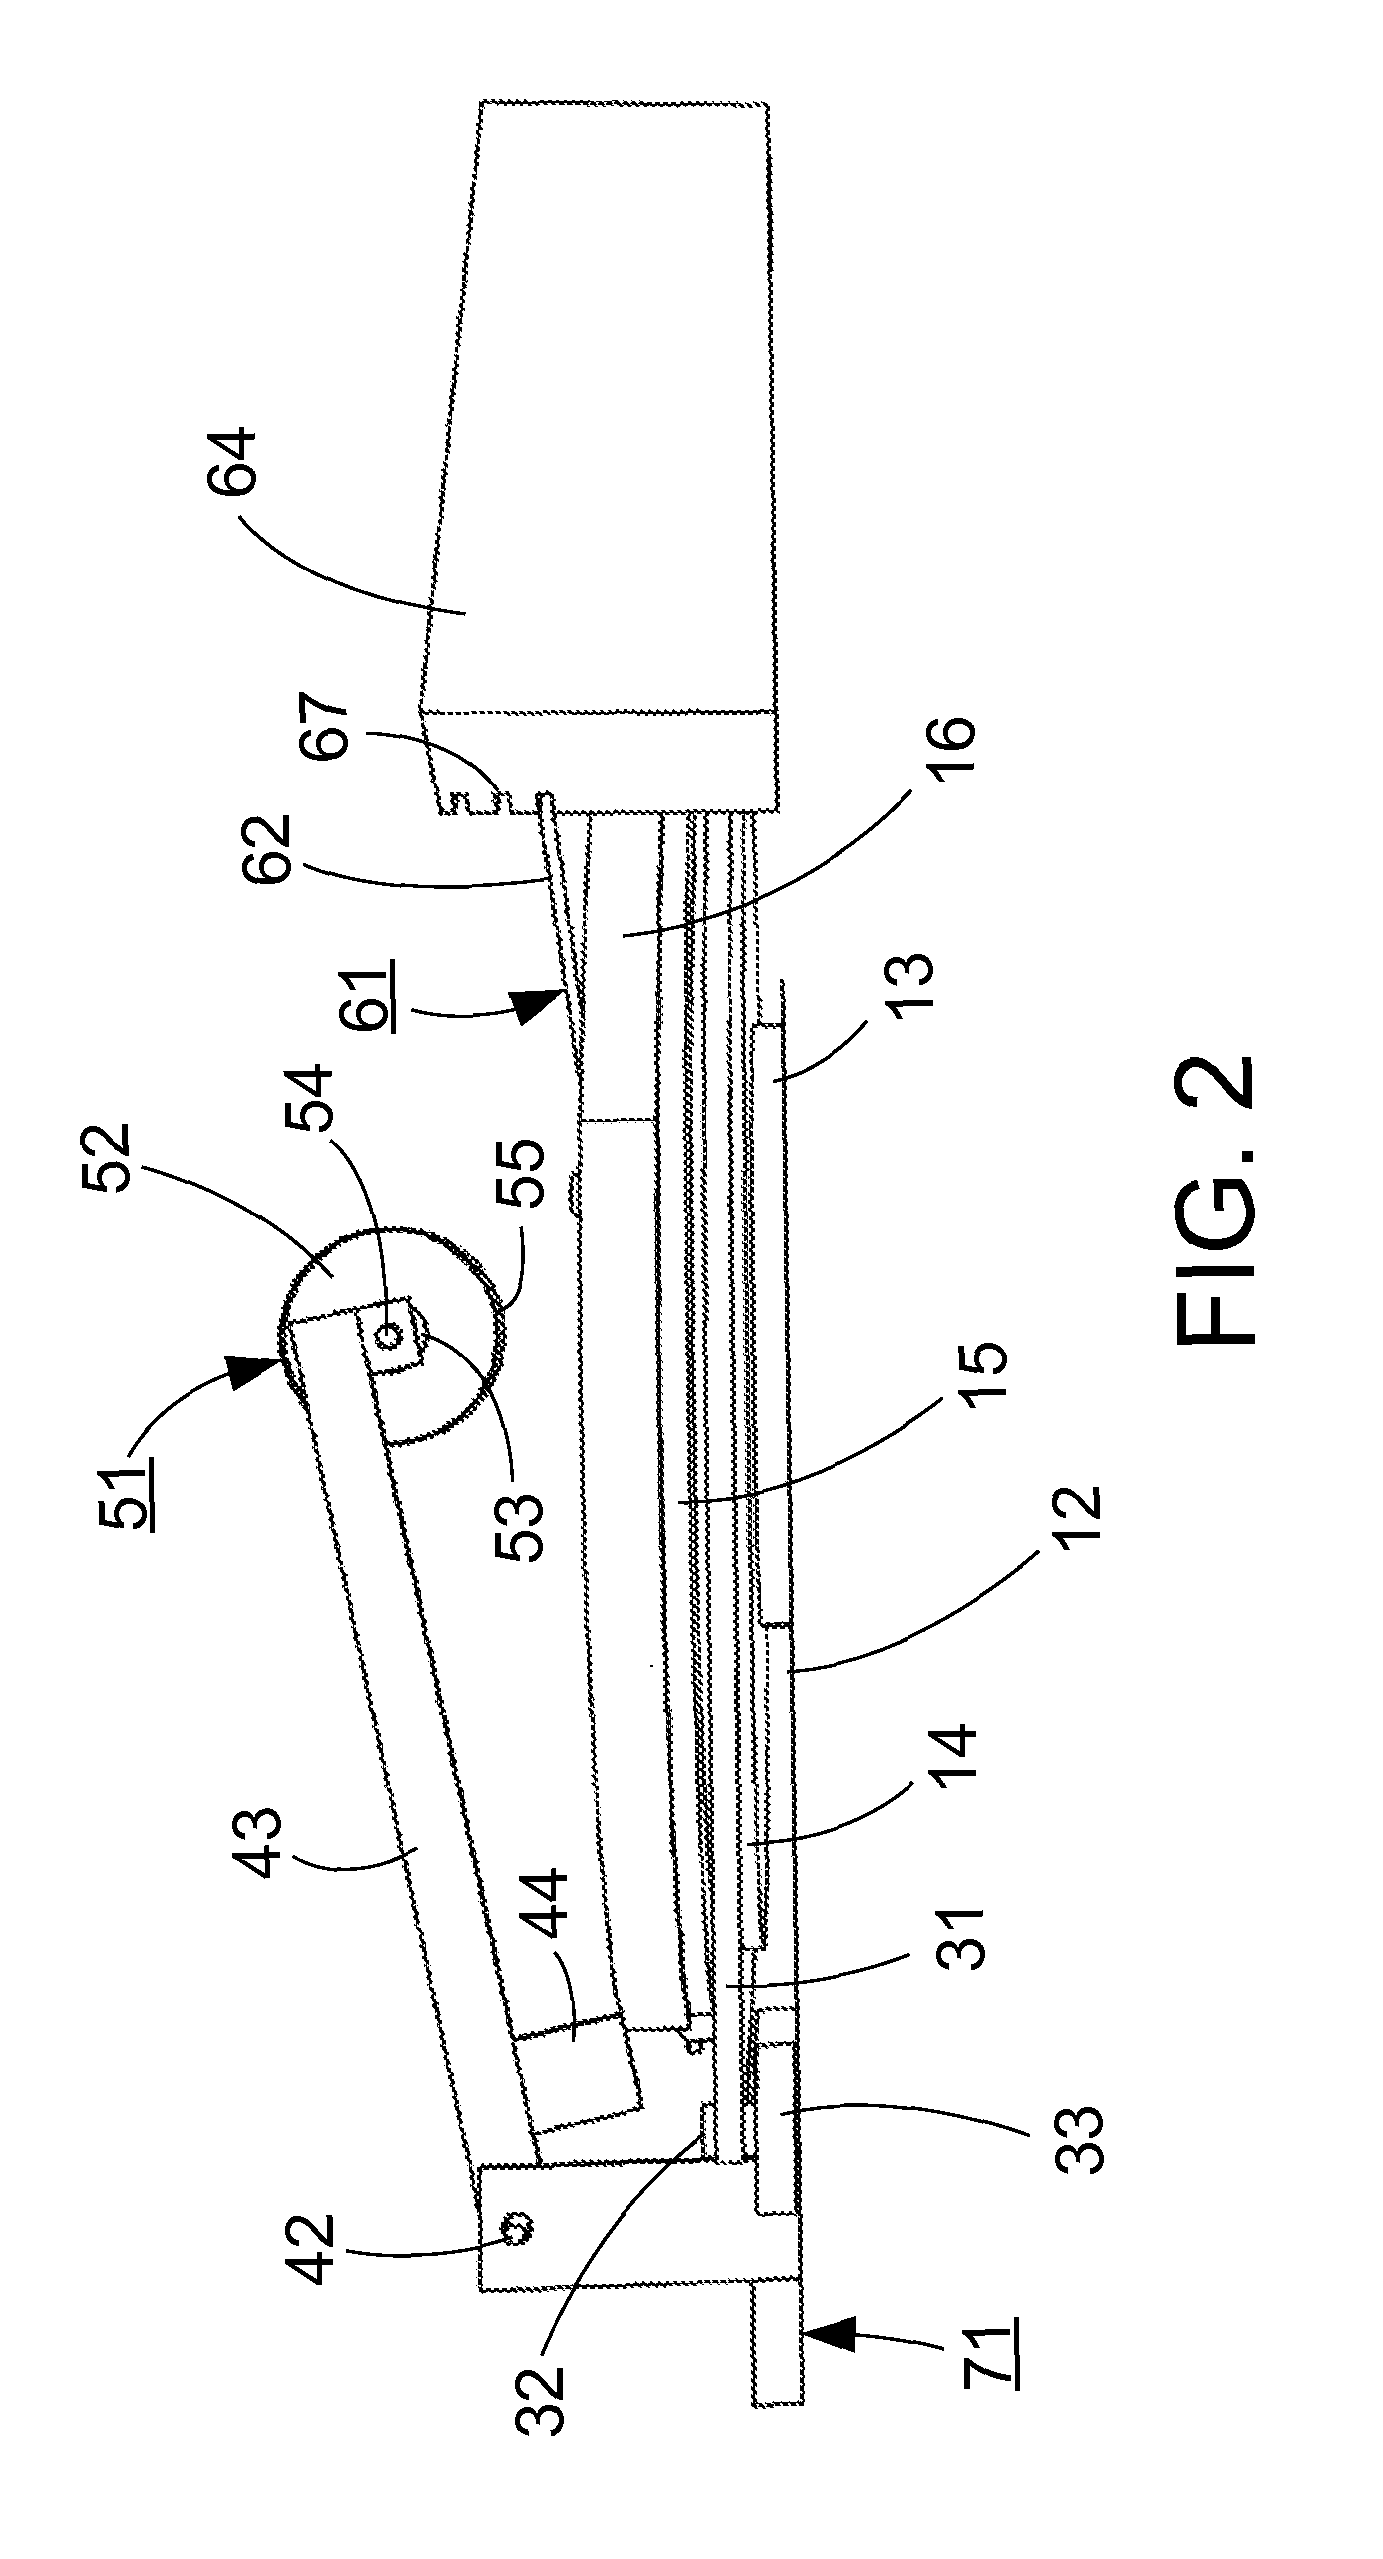 System and method for automatic page turning for book imaging